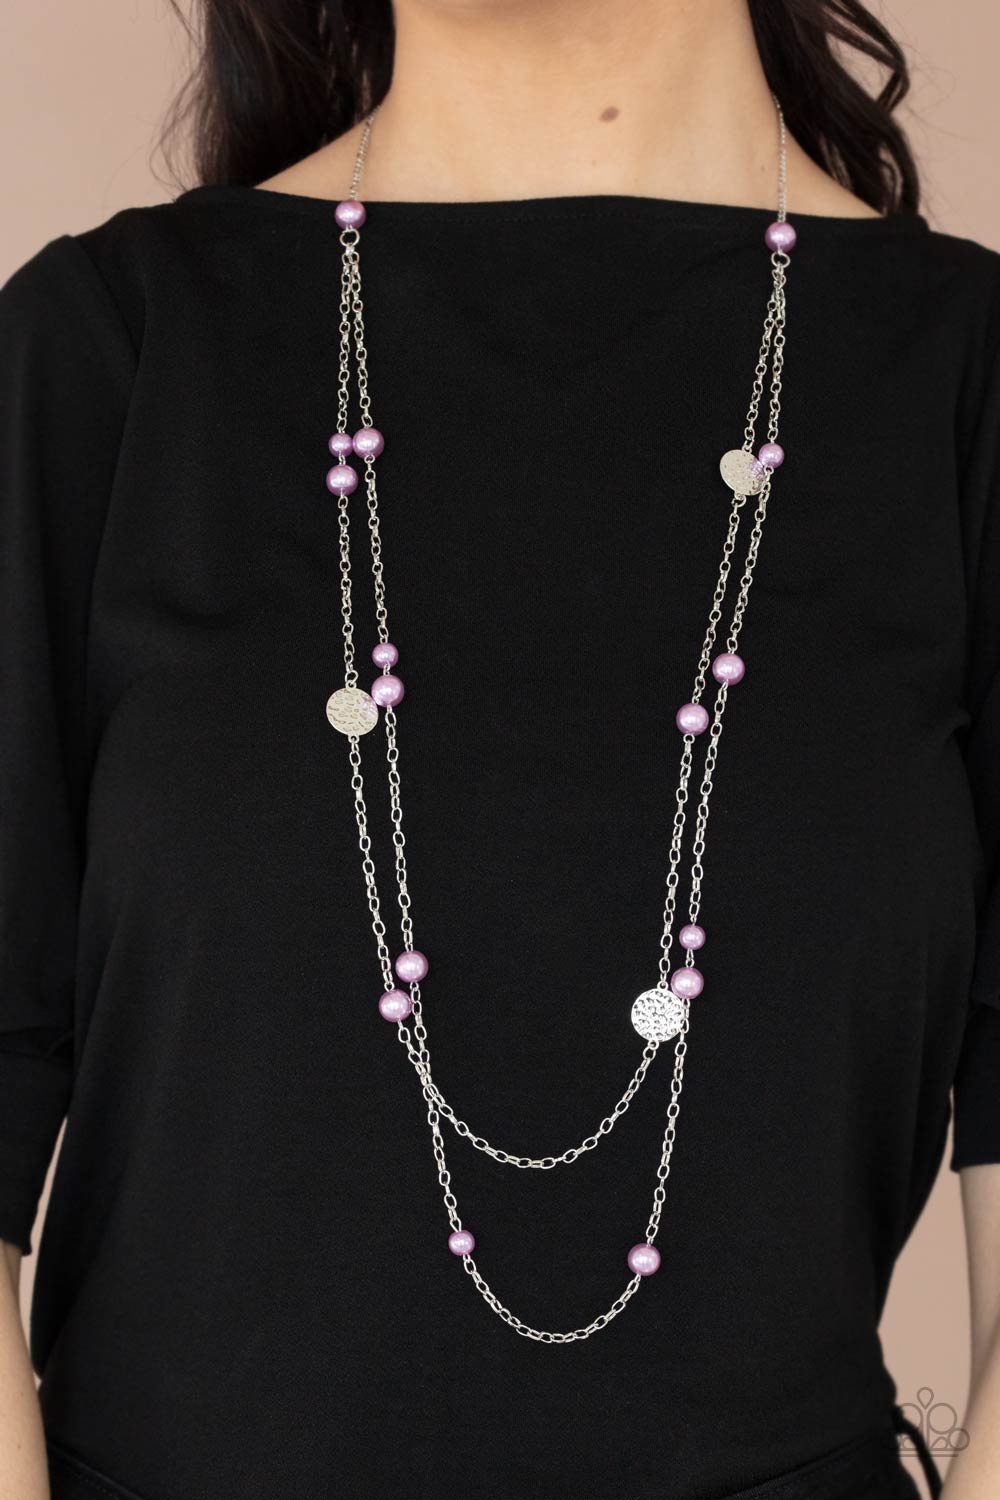 Sublime Awakening - Purple Pearl Necklace - Paparazzi Accessories - Double strands of lengthened silver chains are adorned with soft purple pearls. Three shiny hammered silver discs create bold asymmetrical accents for an eye-catching finish. Features an adjustable clasp closure. Sold as one individual necklace.